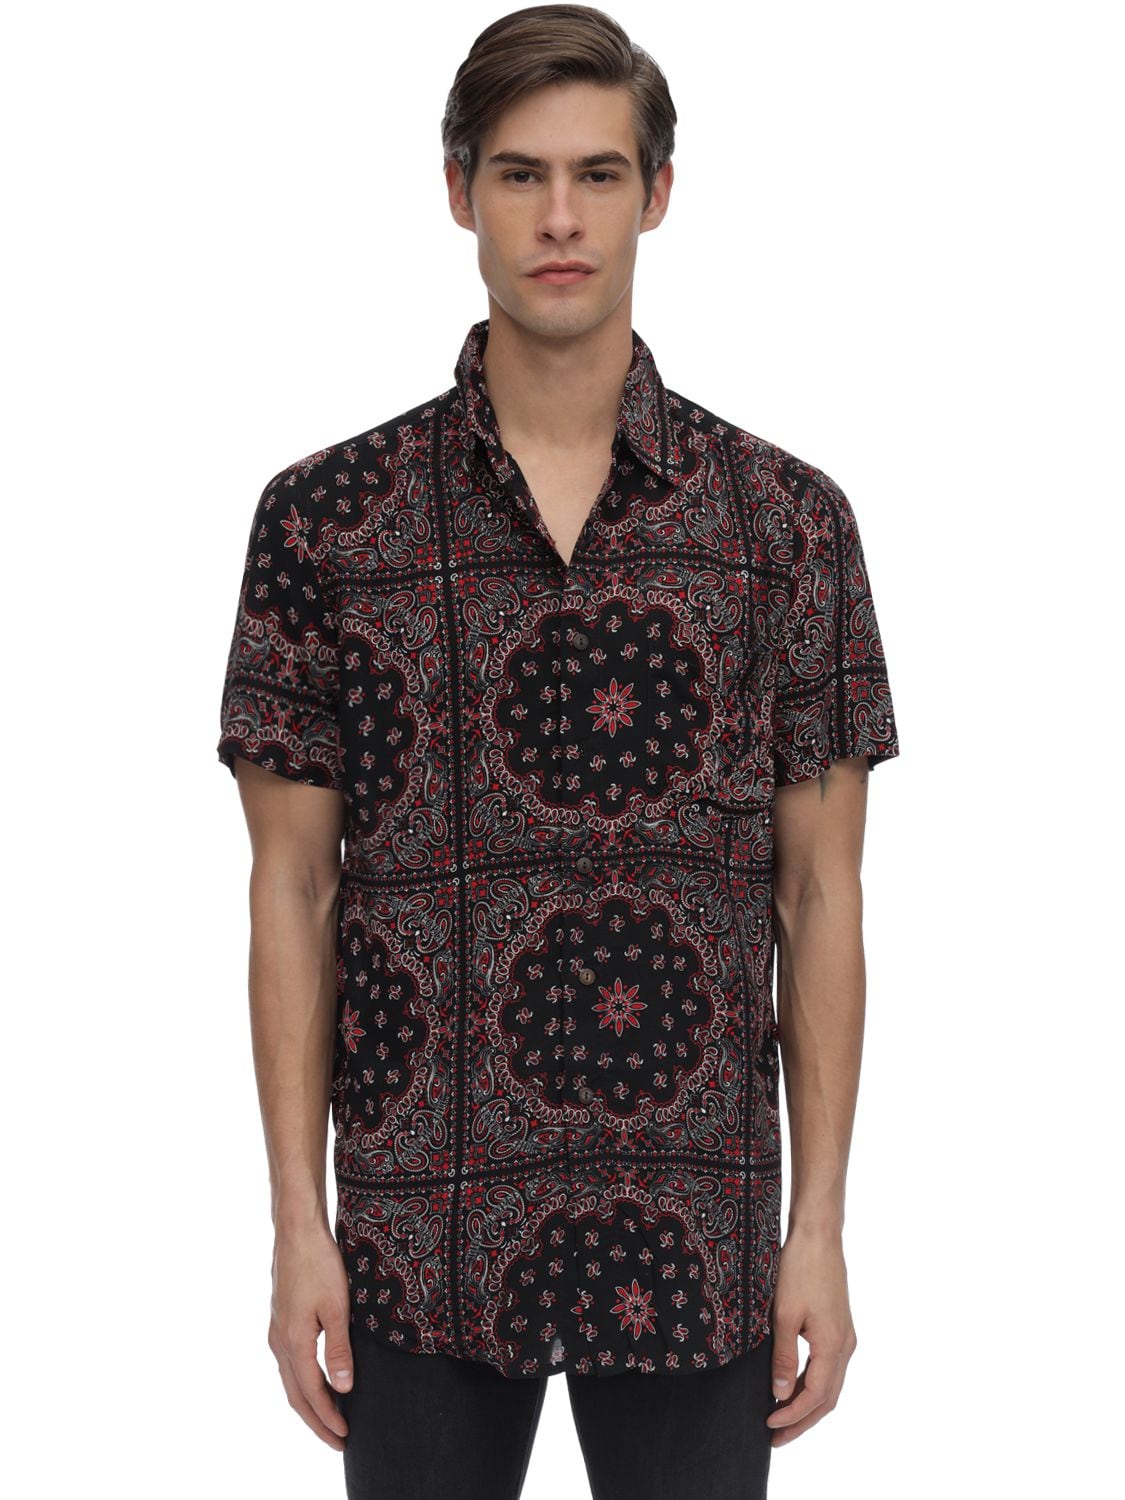 The People Vs Stevie Bandana Printed Rayon Shirt In Multicolor